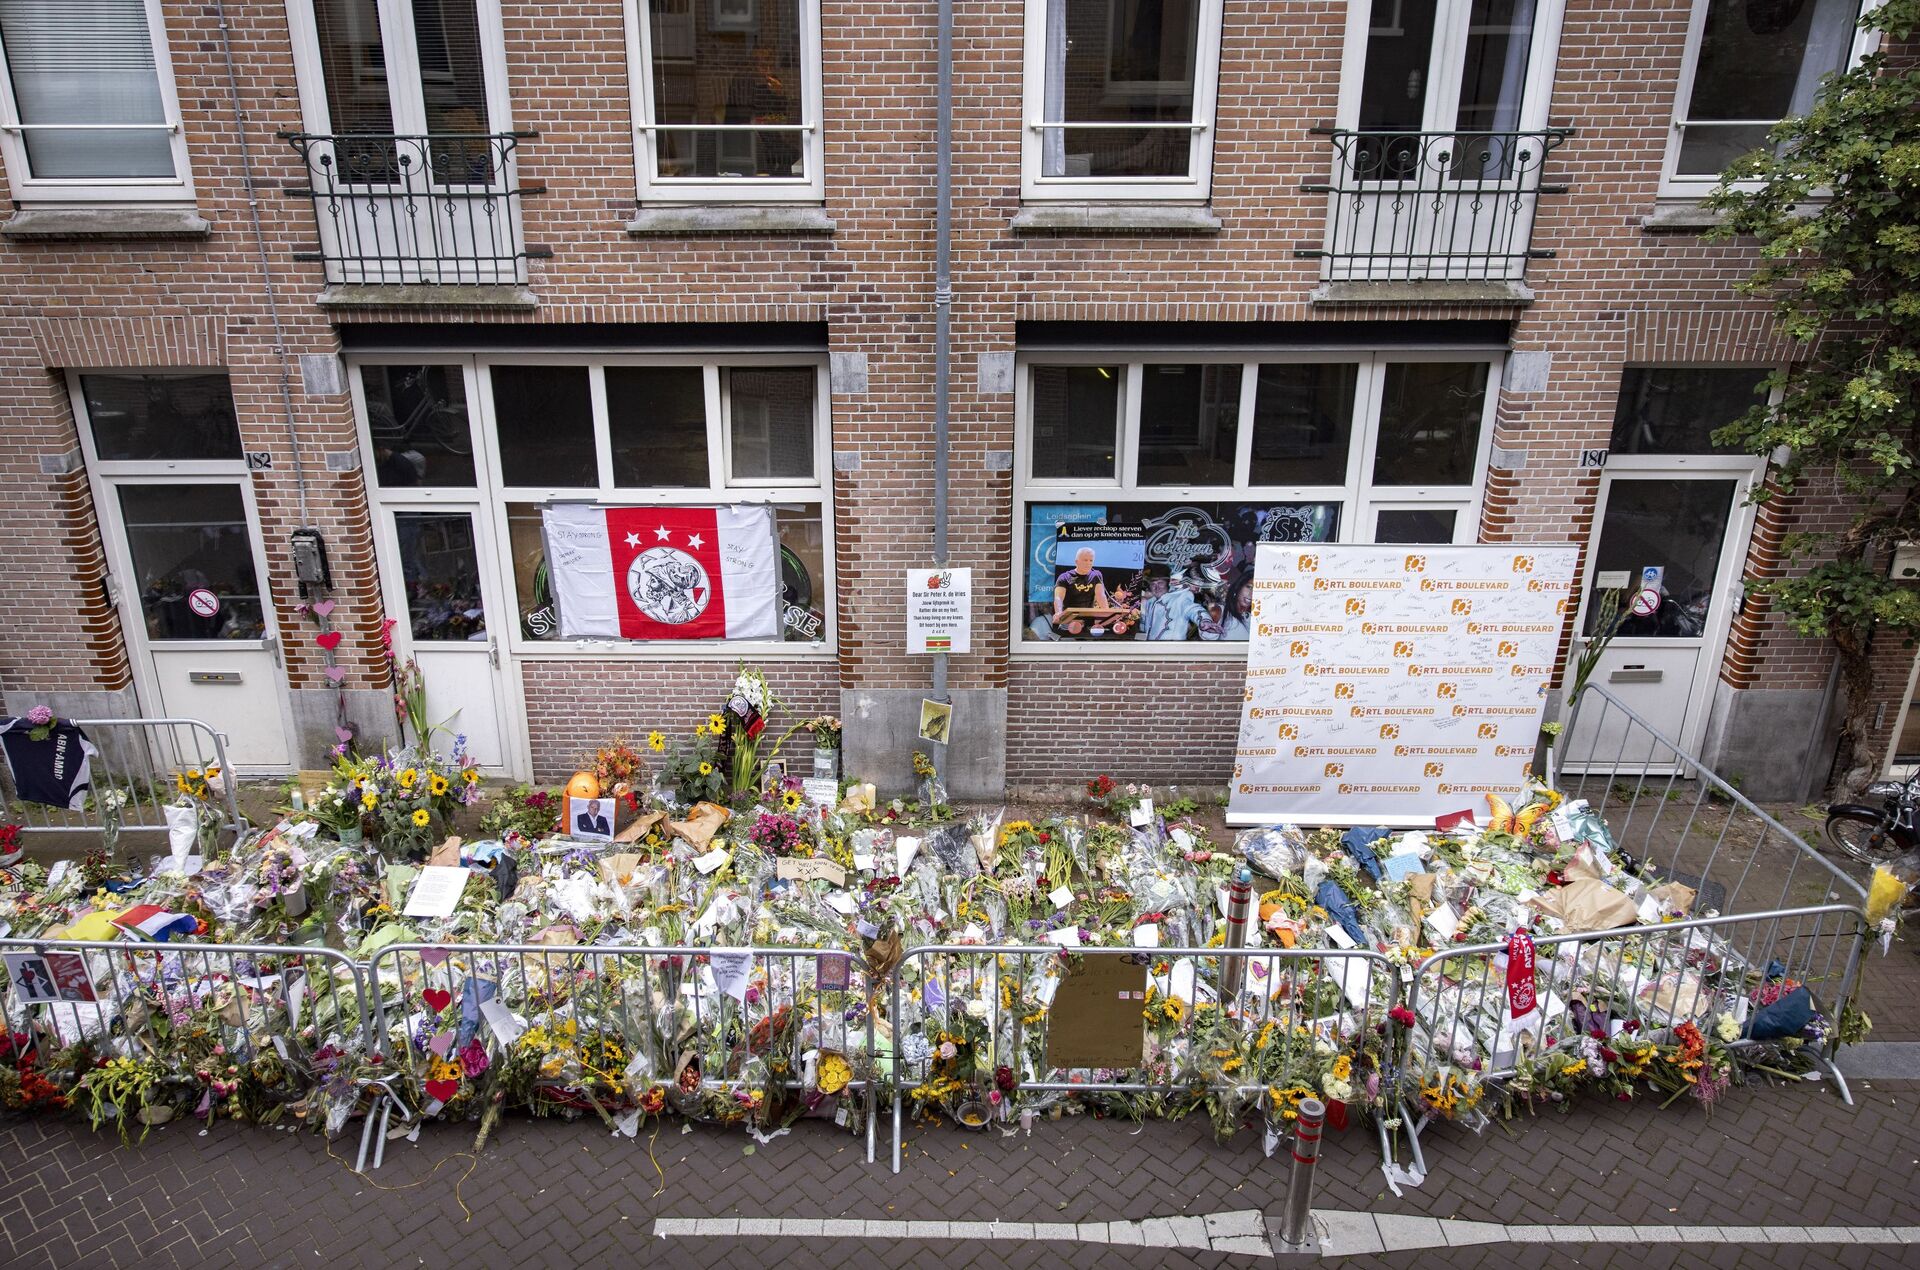 Flowers have been laid in the Lange Leidsedwarsstraat street in tribute to Dutch prominent crime journalist Peter R de Vries who was gunned down in broad daylight on July 6, 2021 on a busy Amsterdam street shortly after leaving a television talk-show, in the center of Amsterdam on July 12, 2021 - Sputnik International, 1920, 07.09.2021